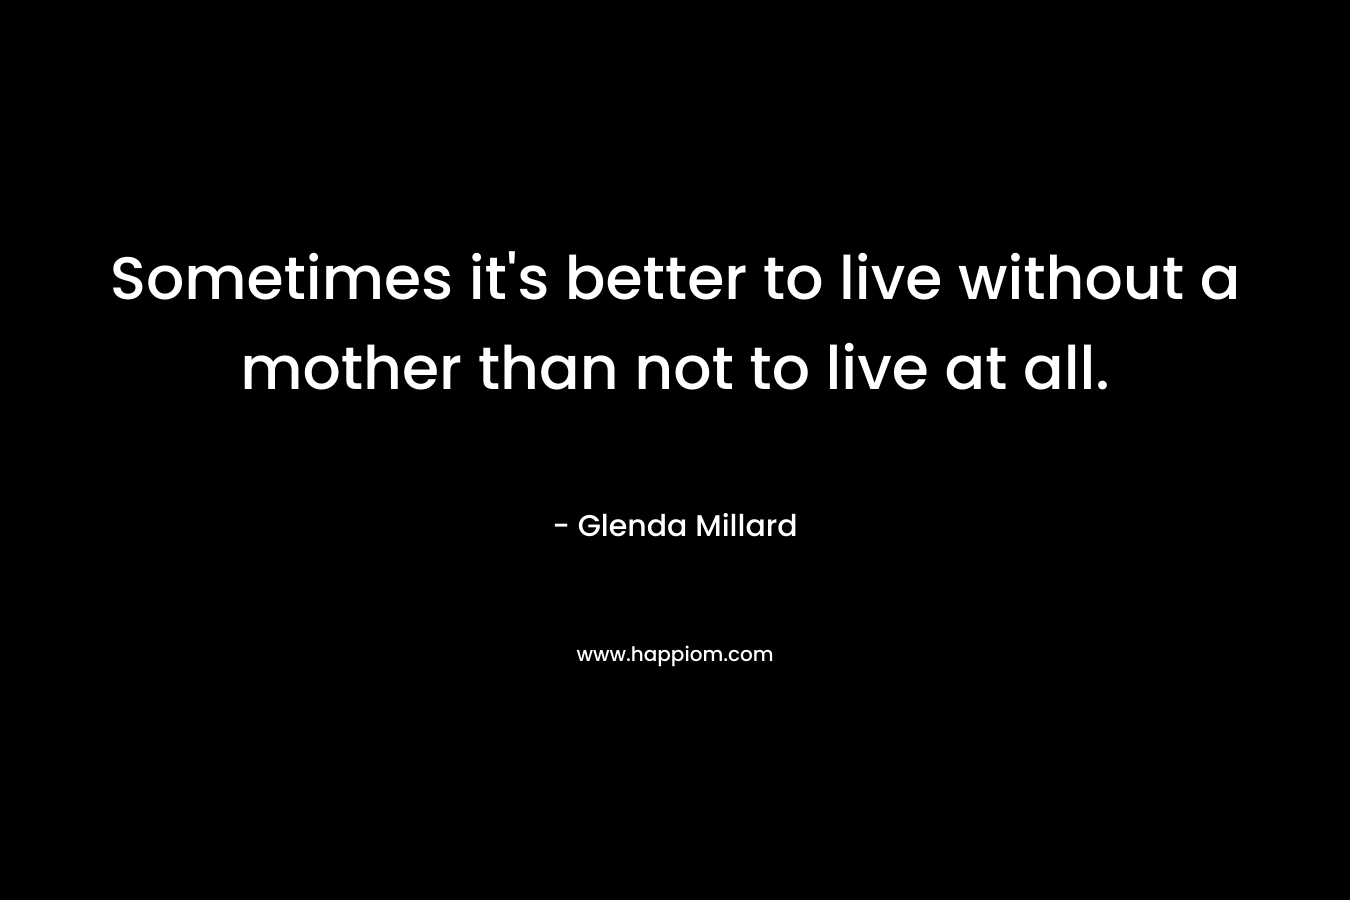 Sometimes it's better to live without a mother than not to live at all.